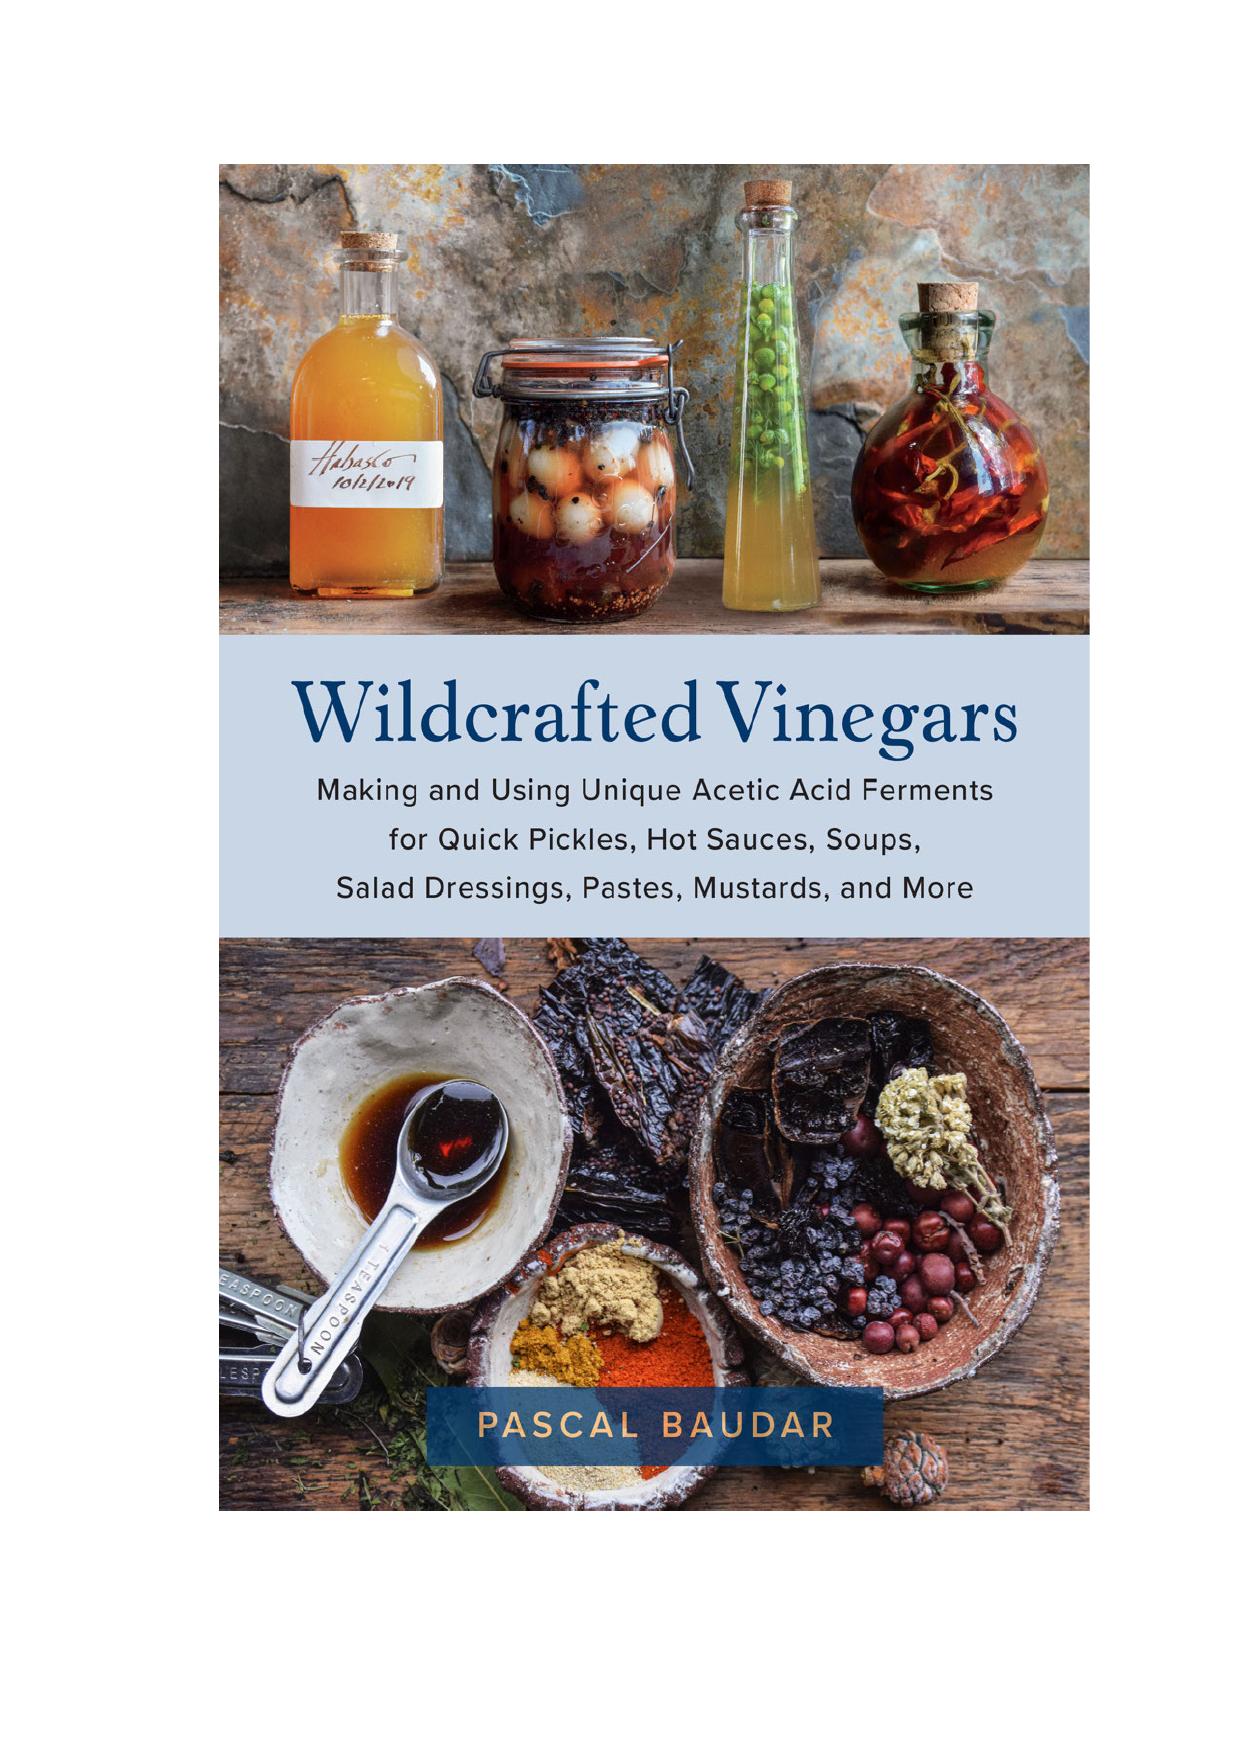 Wildcrafted Vinegars: Making and Using Unique Acetic Acid Ferments for Quick Pickles, Hot Sauces, Soups, Salad Dressings, Pastes, Mustards, and More by Pascal Baudar